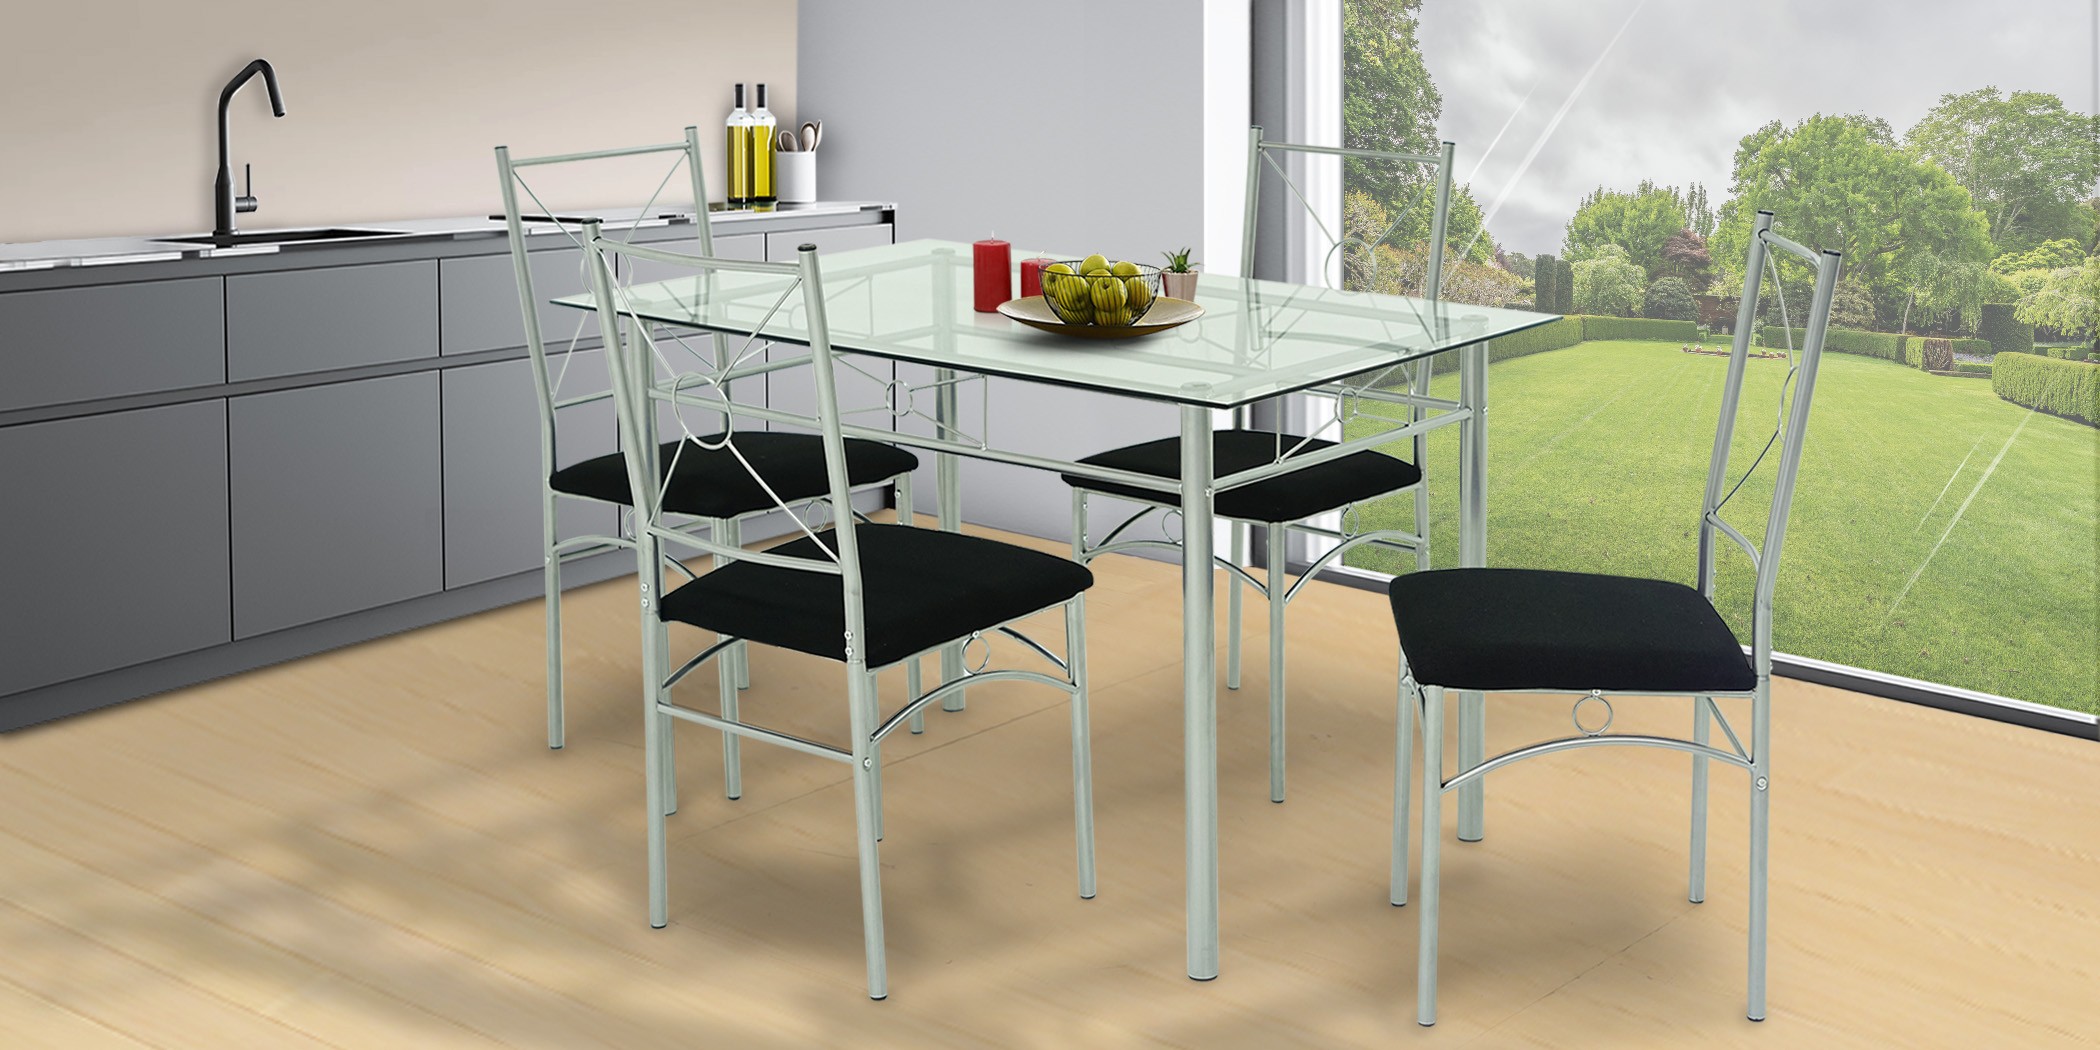 Arvens Table and 4 Chairs Black Metal